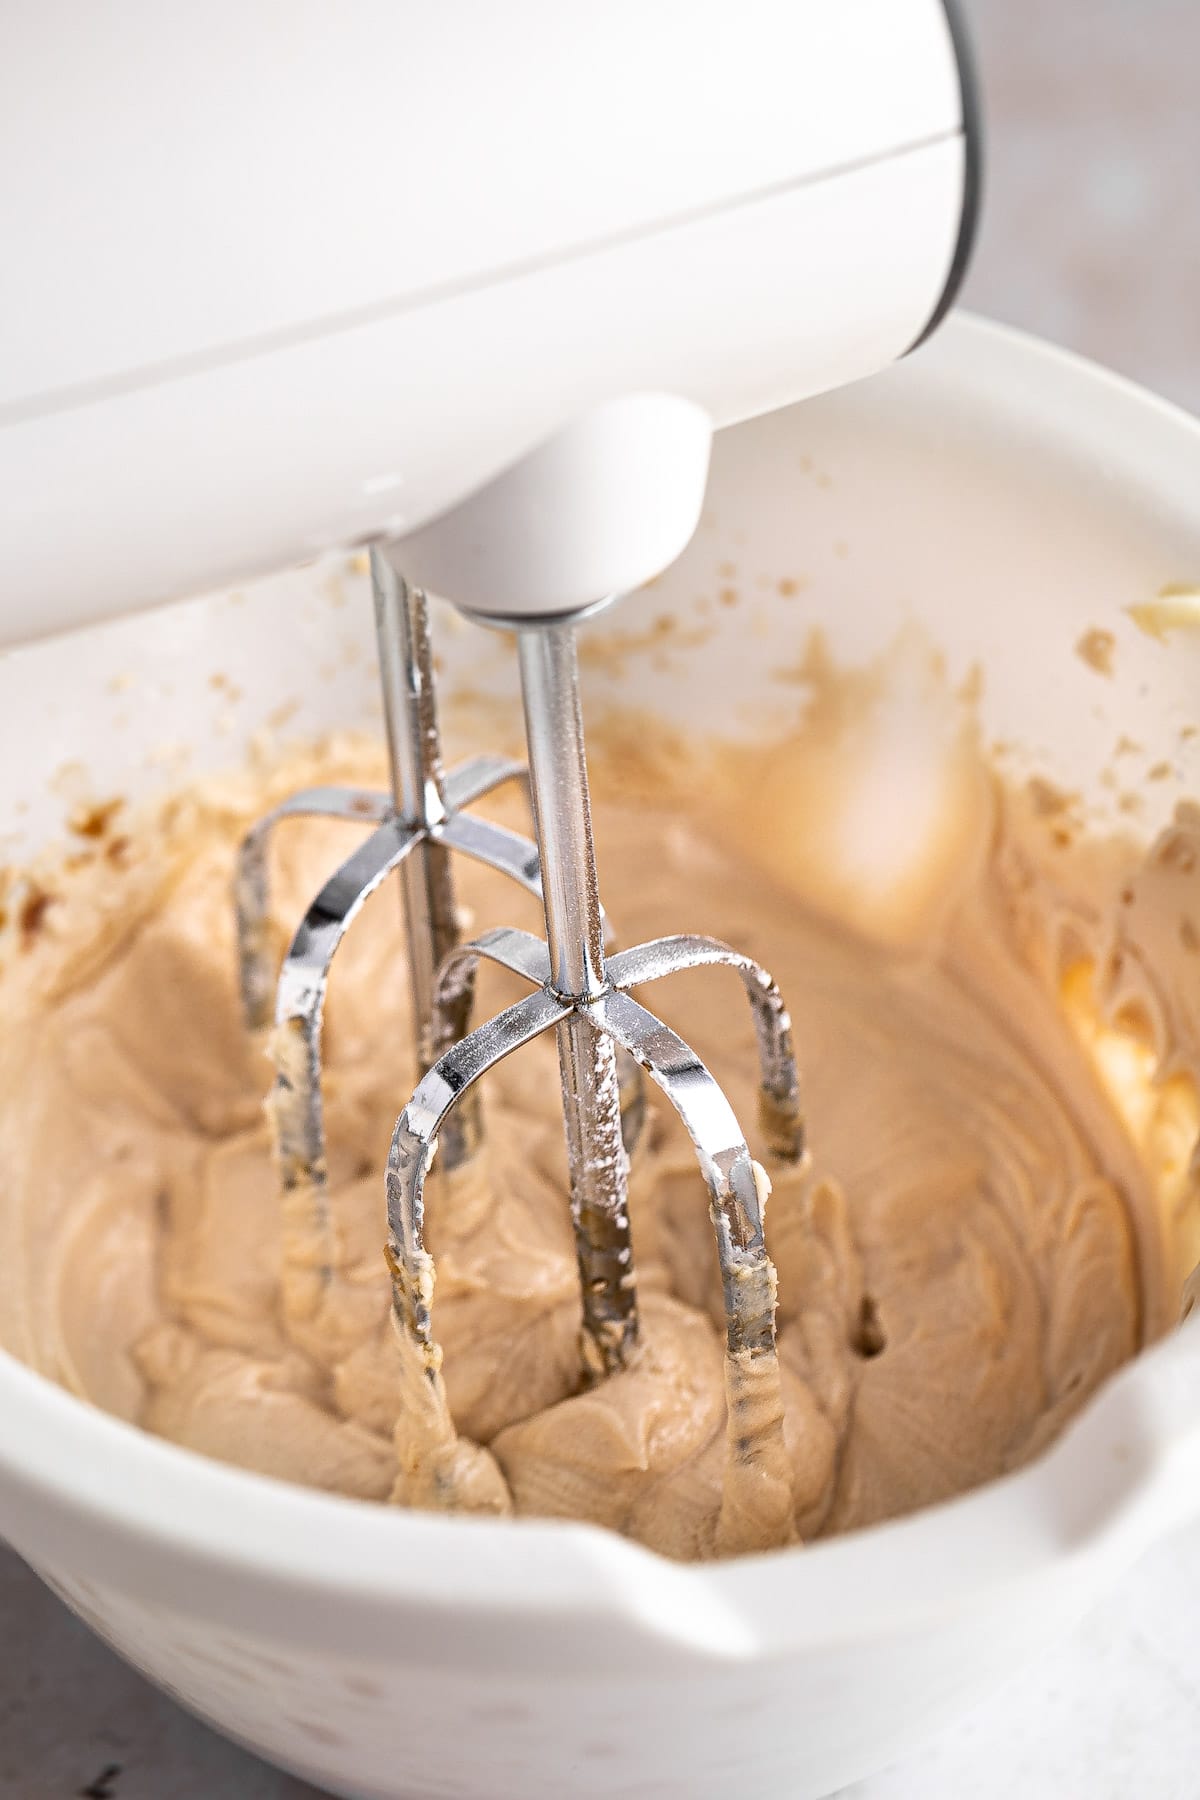 Espresso frosting being mixed with a handheld mixer in a white bowl.